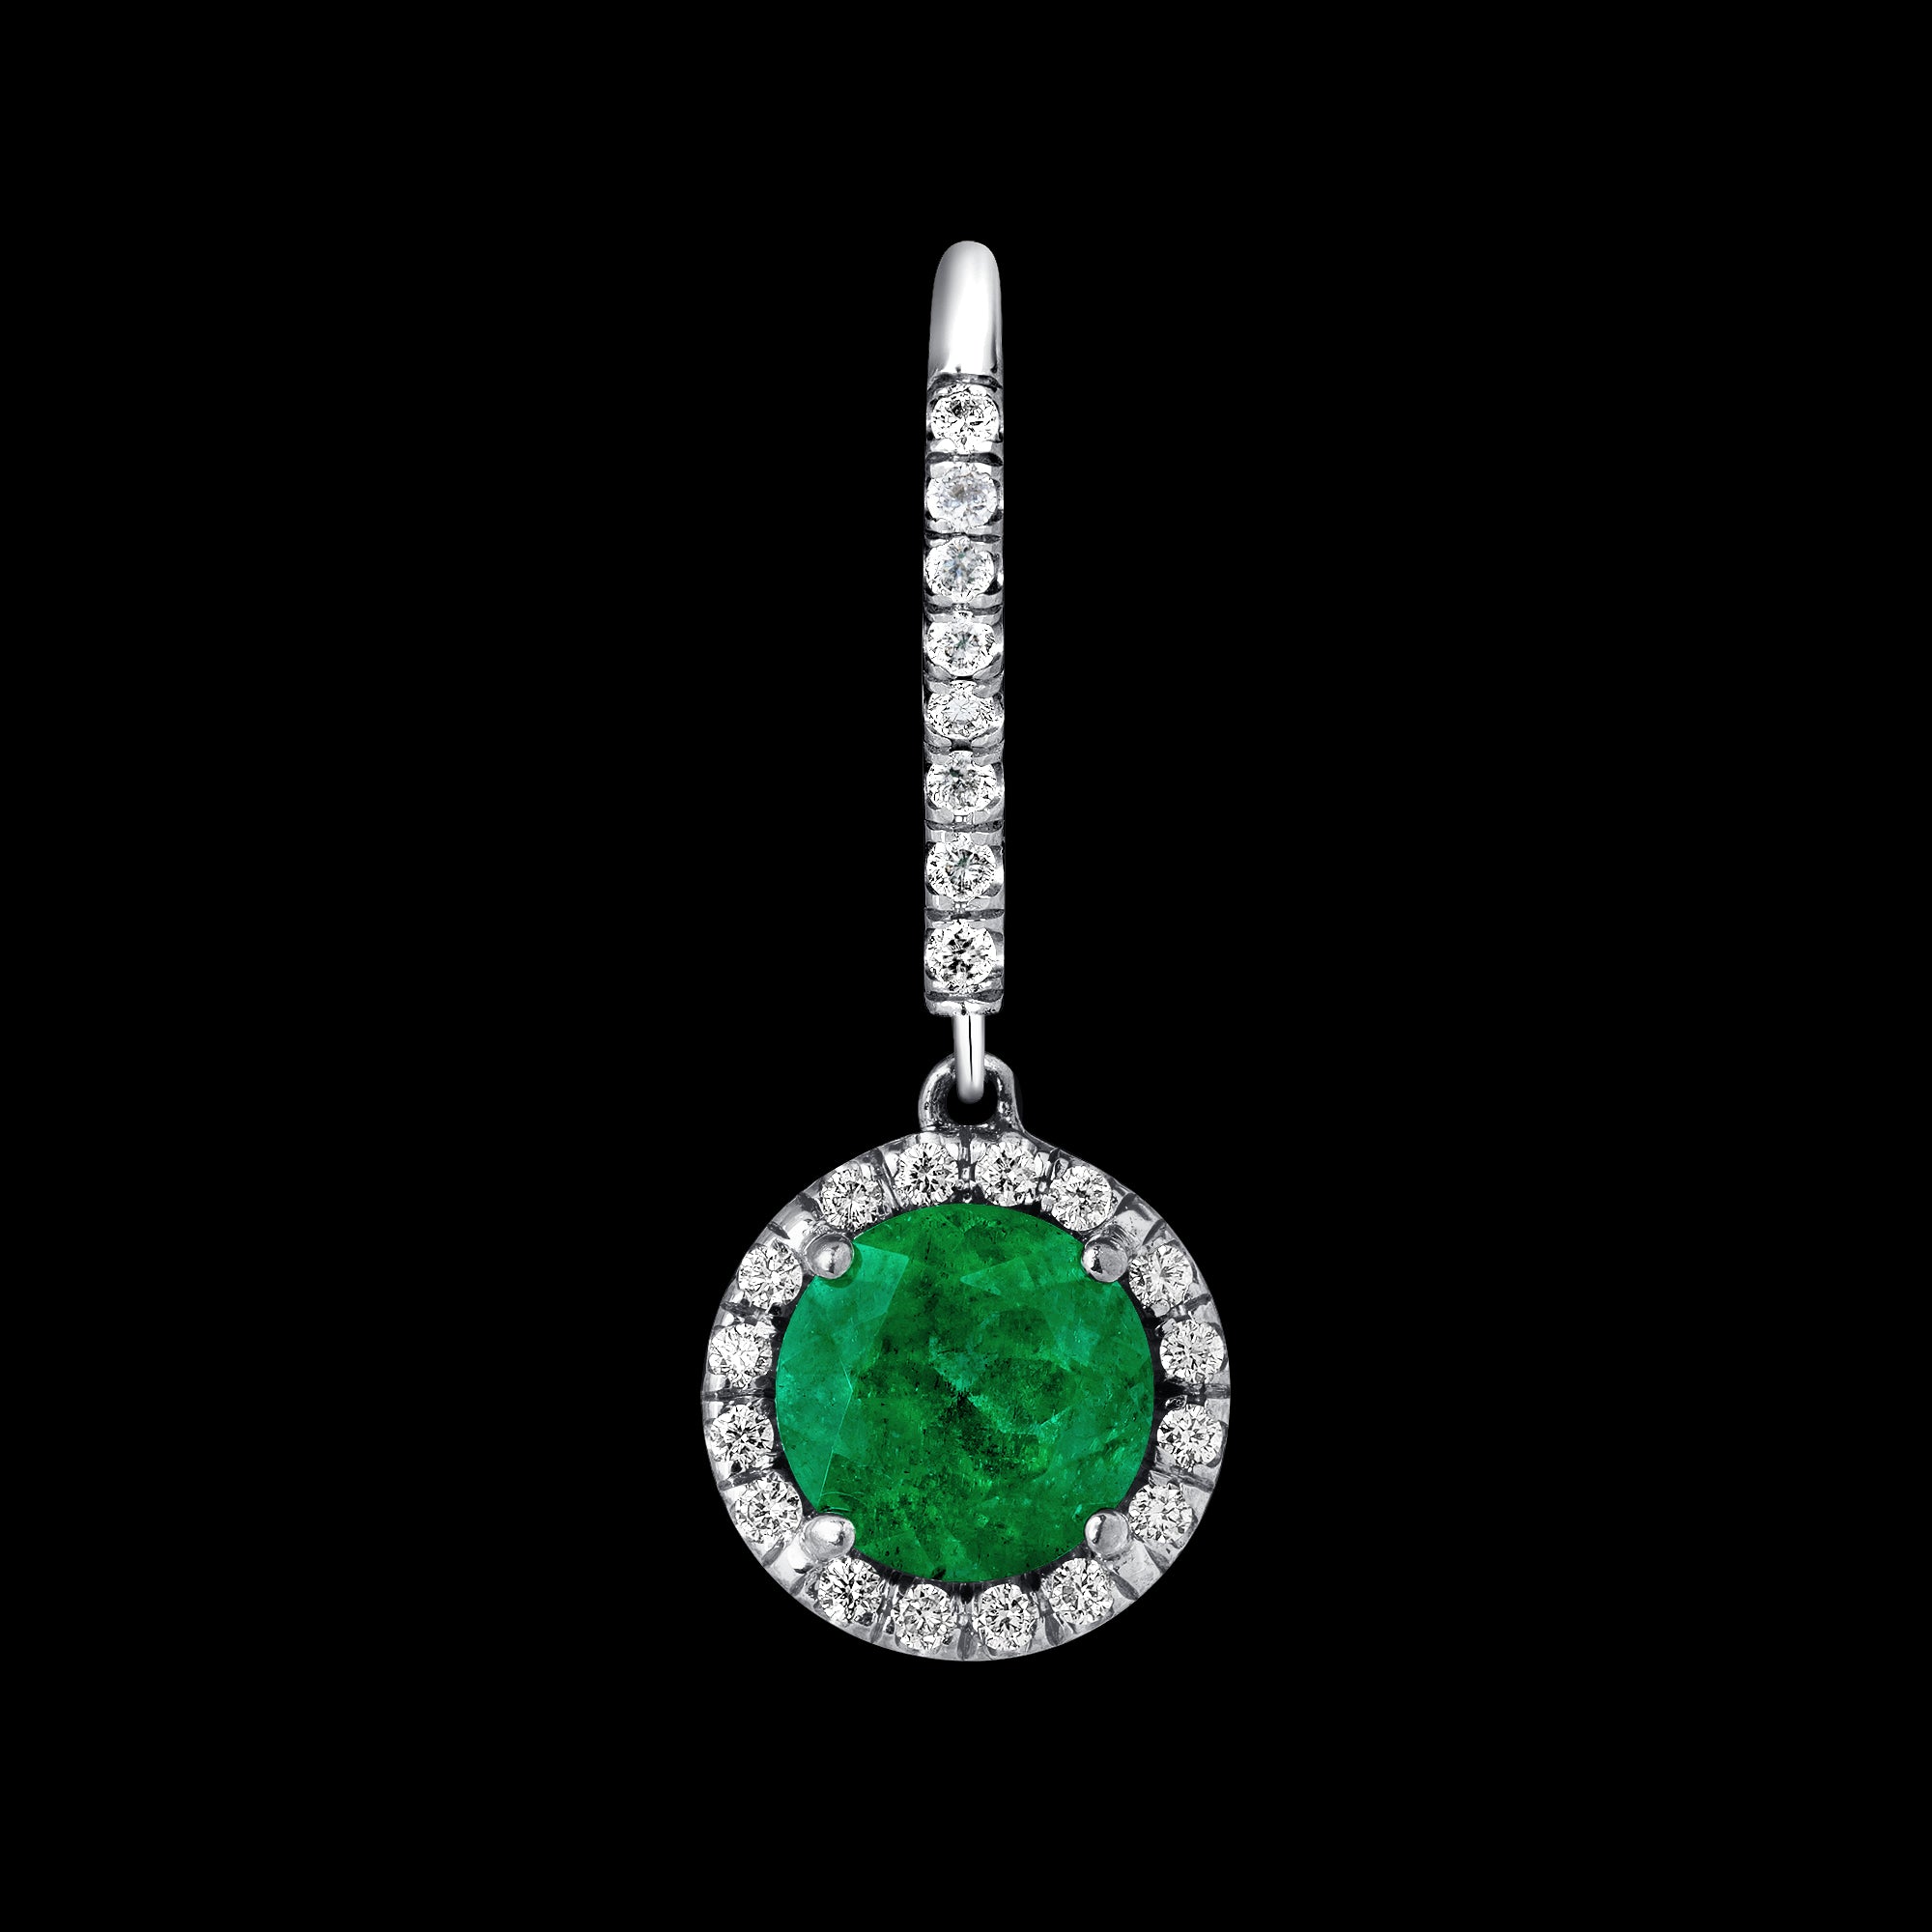 Round Emerald Halo Drop Earrings - 2.01ct TW